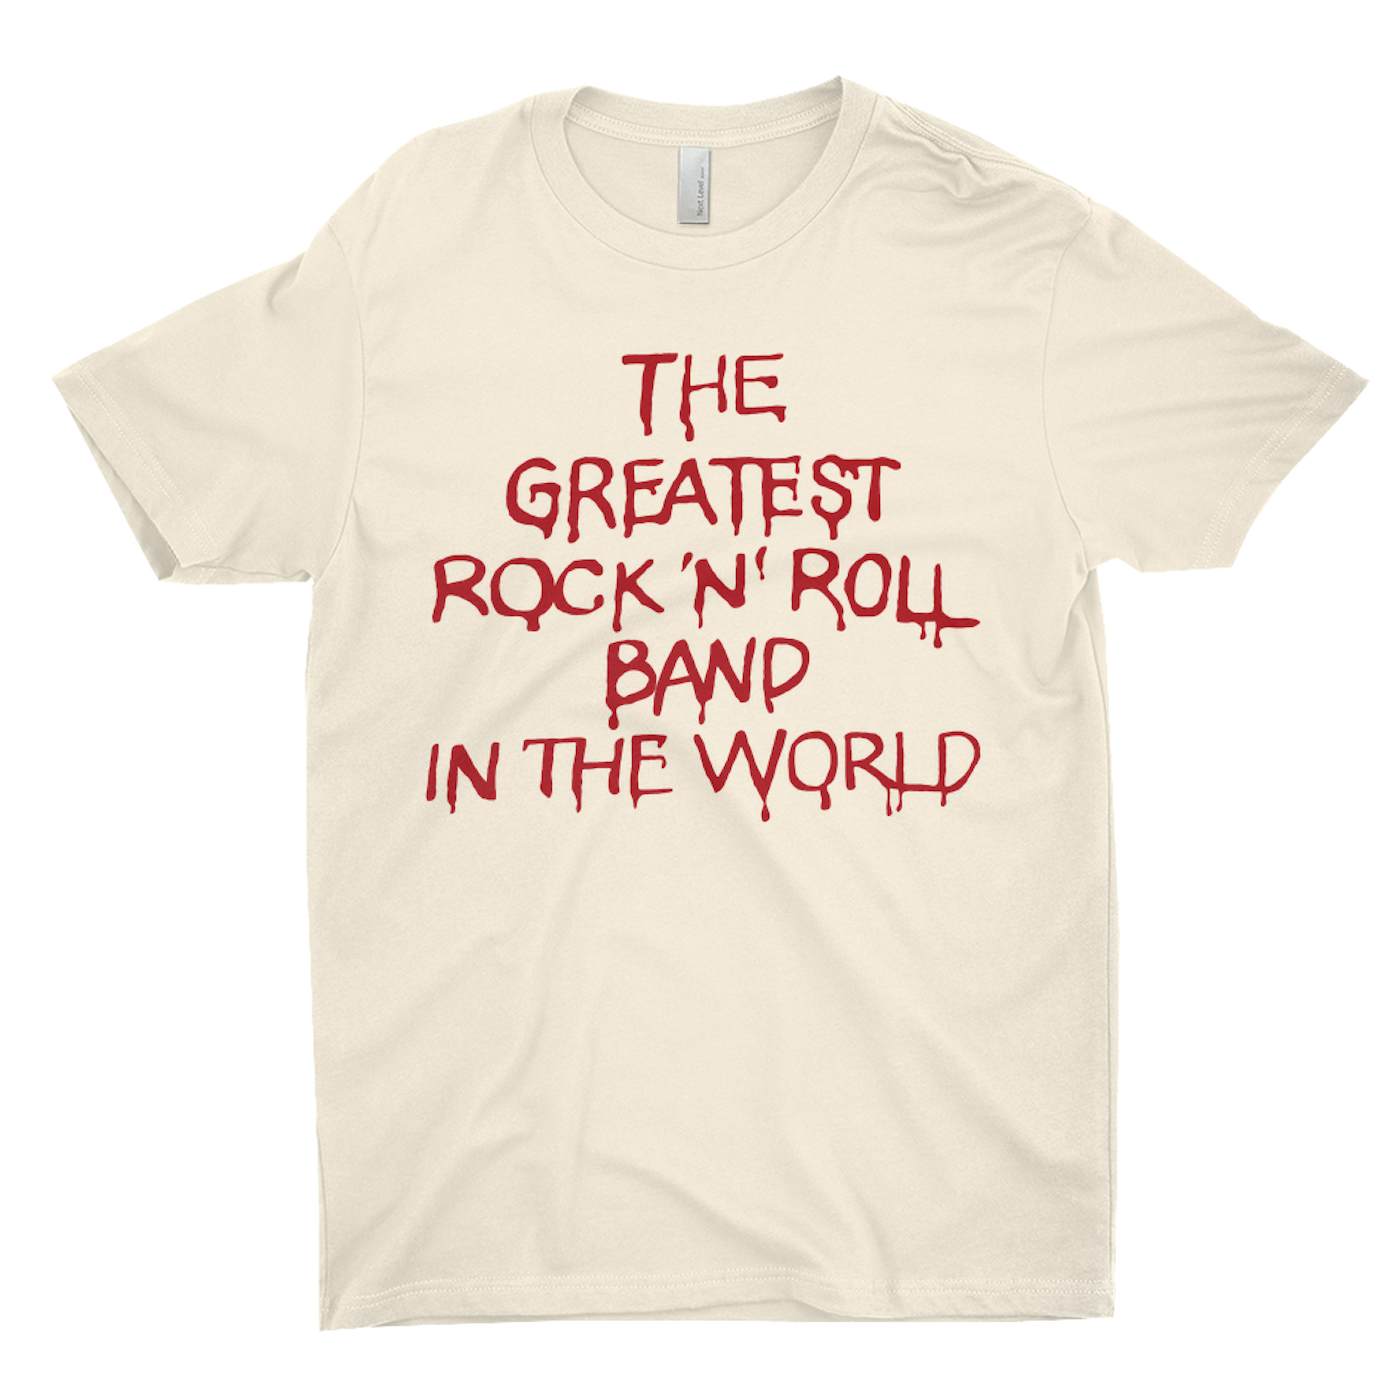 The Who T-Shirt | The Greatest Band Worn By Keith Moon The Who Shirt